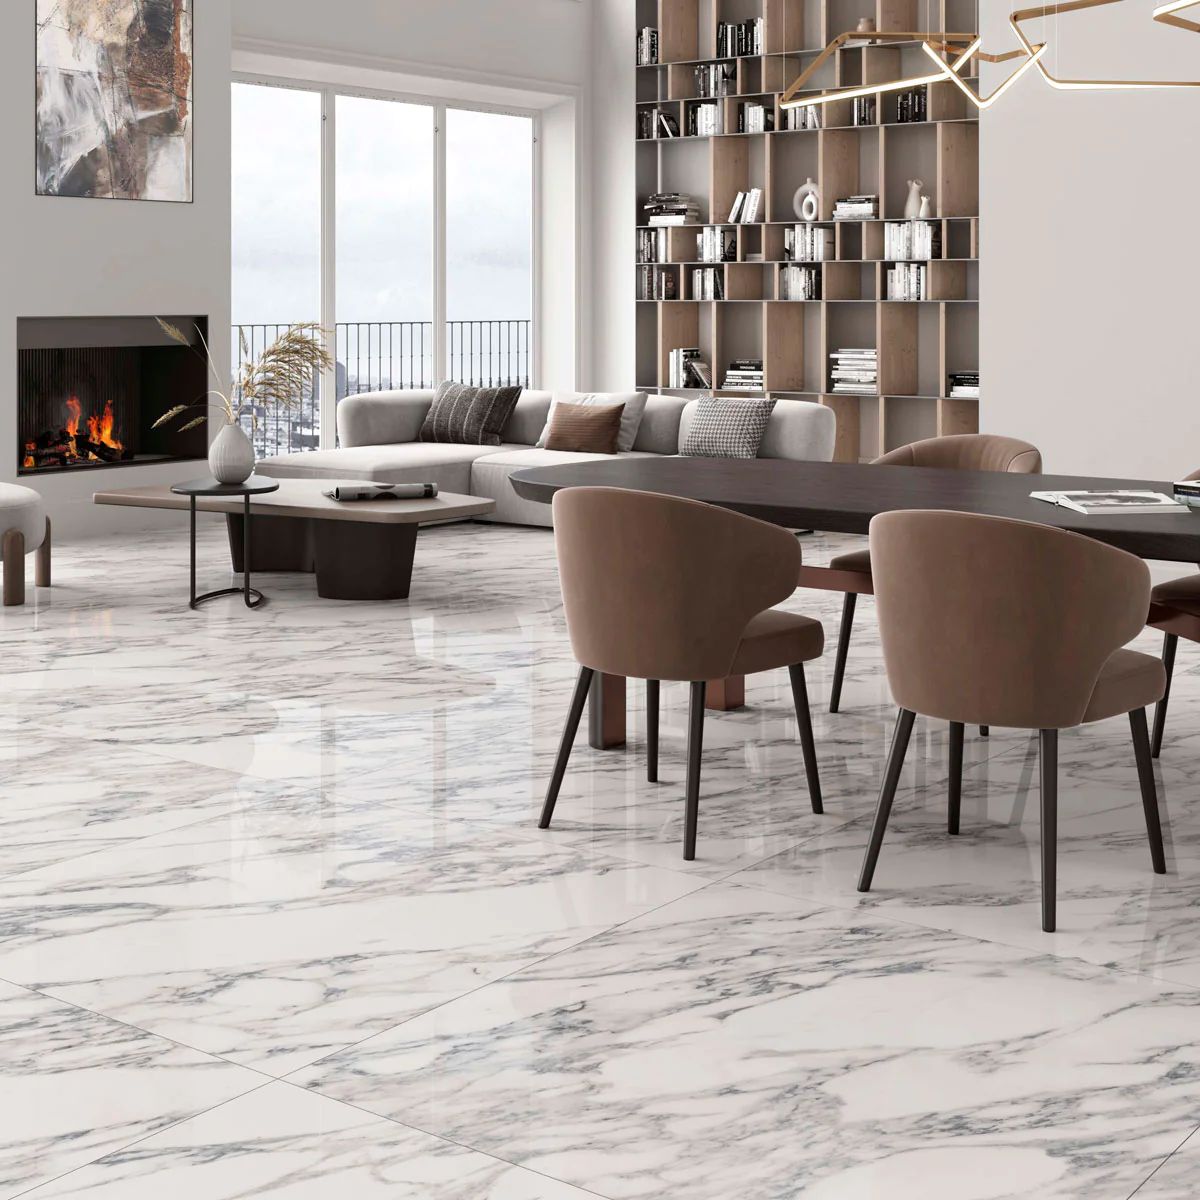 Arabescato Polished Gray and White | Tile Club